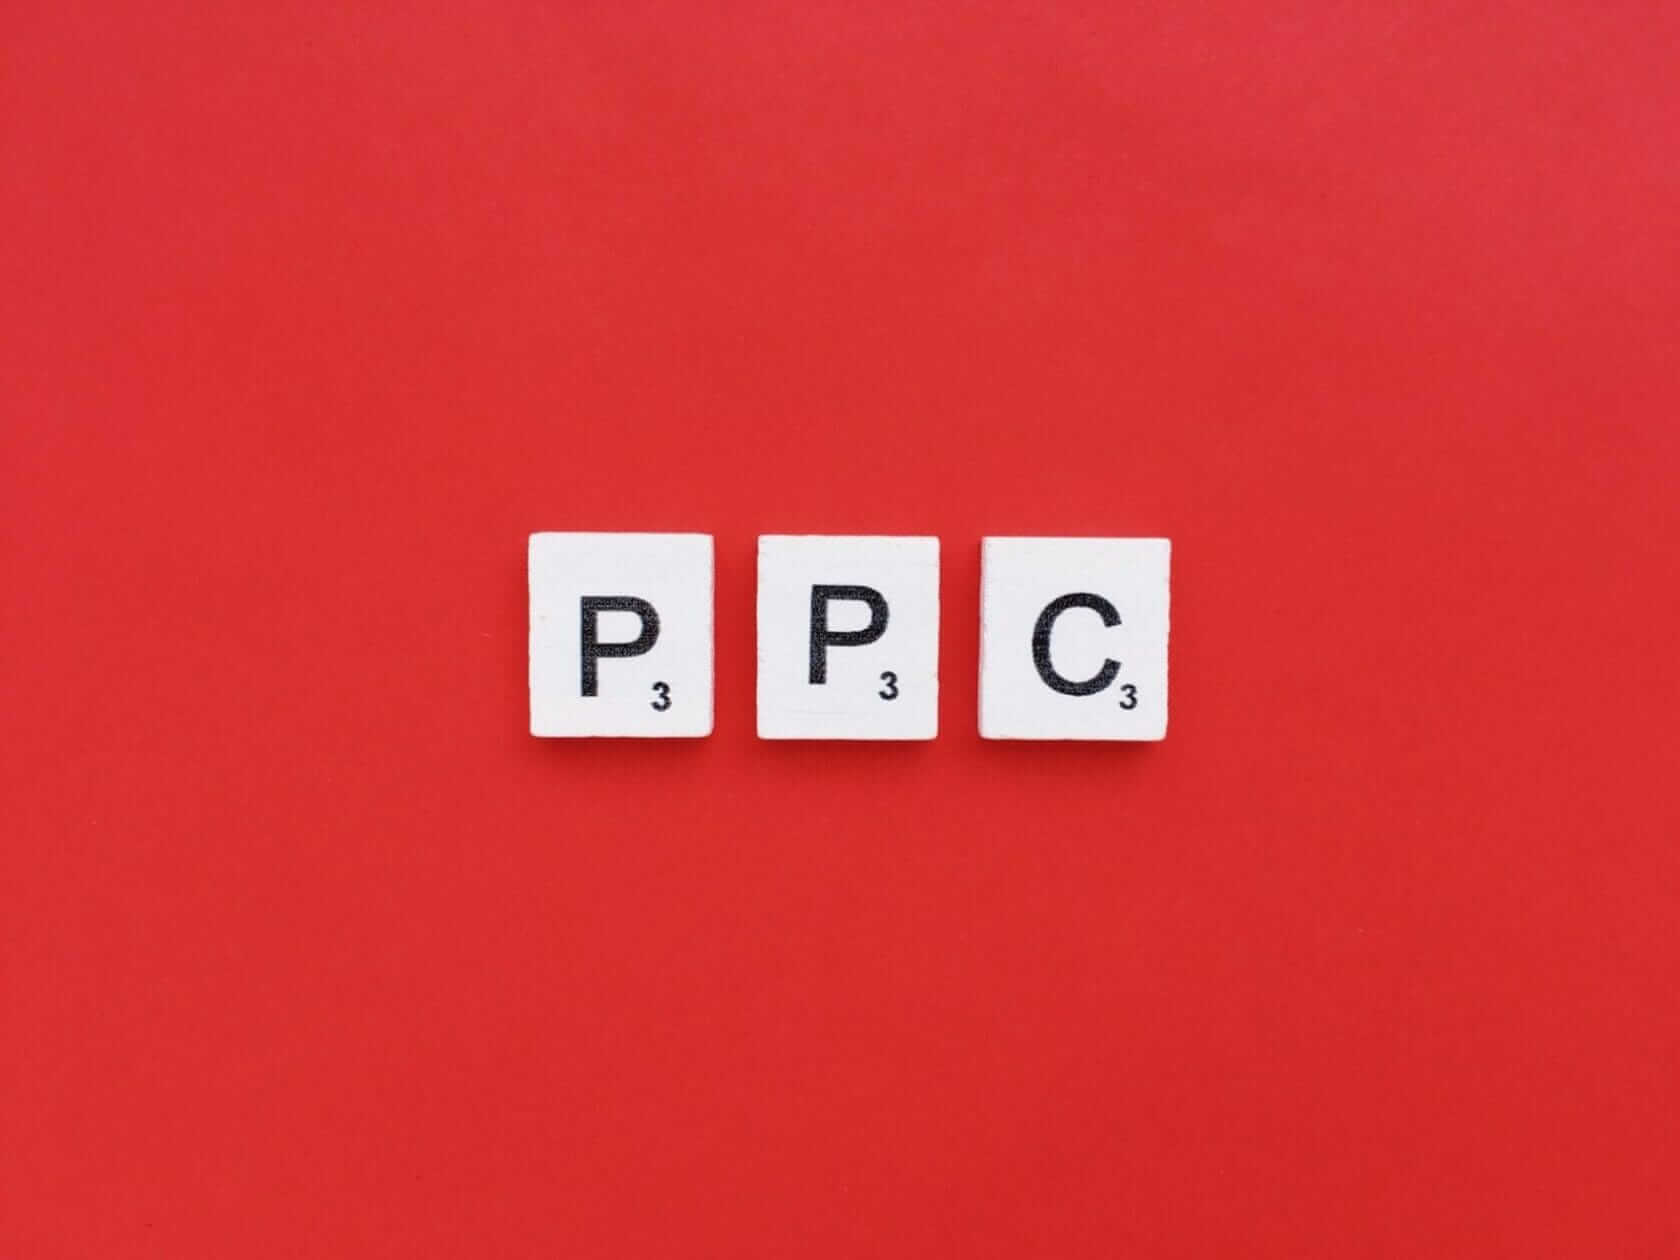 Pay Per Click advertising-PPC scrabble letters word on a red background